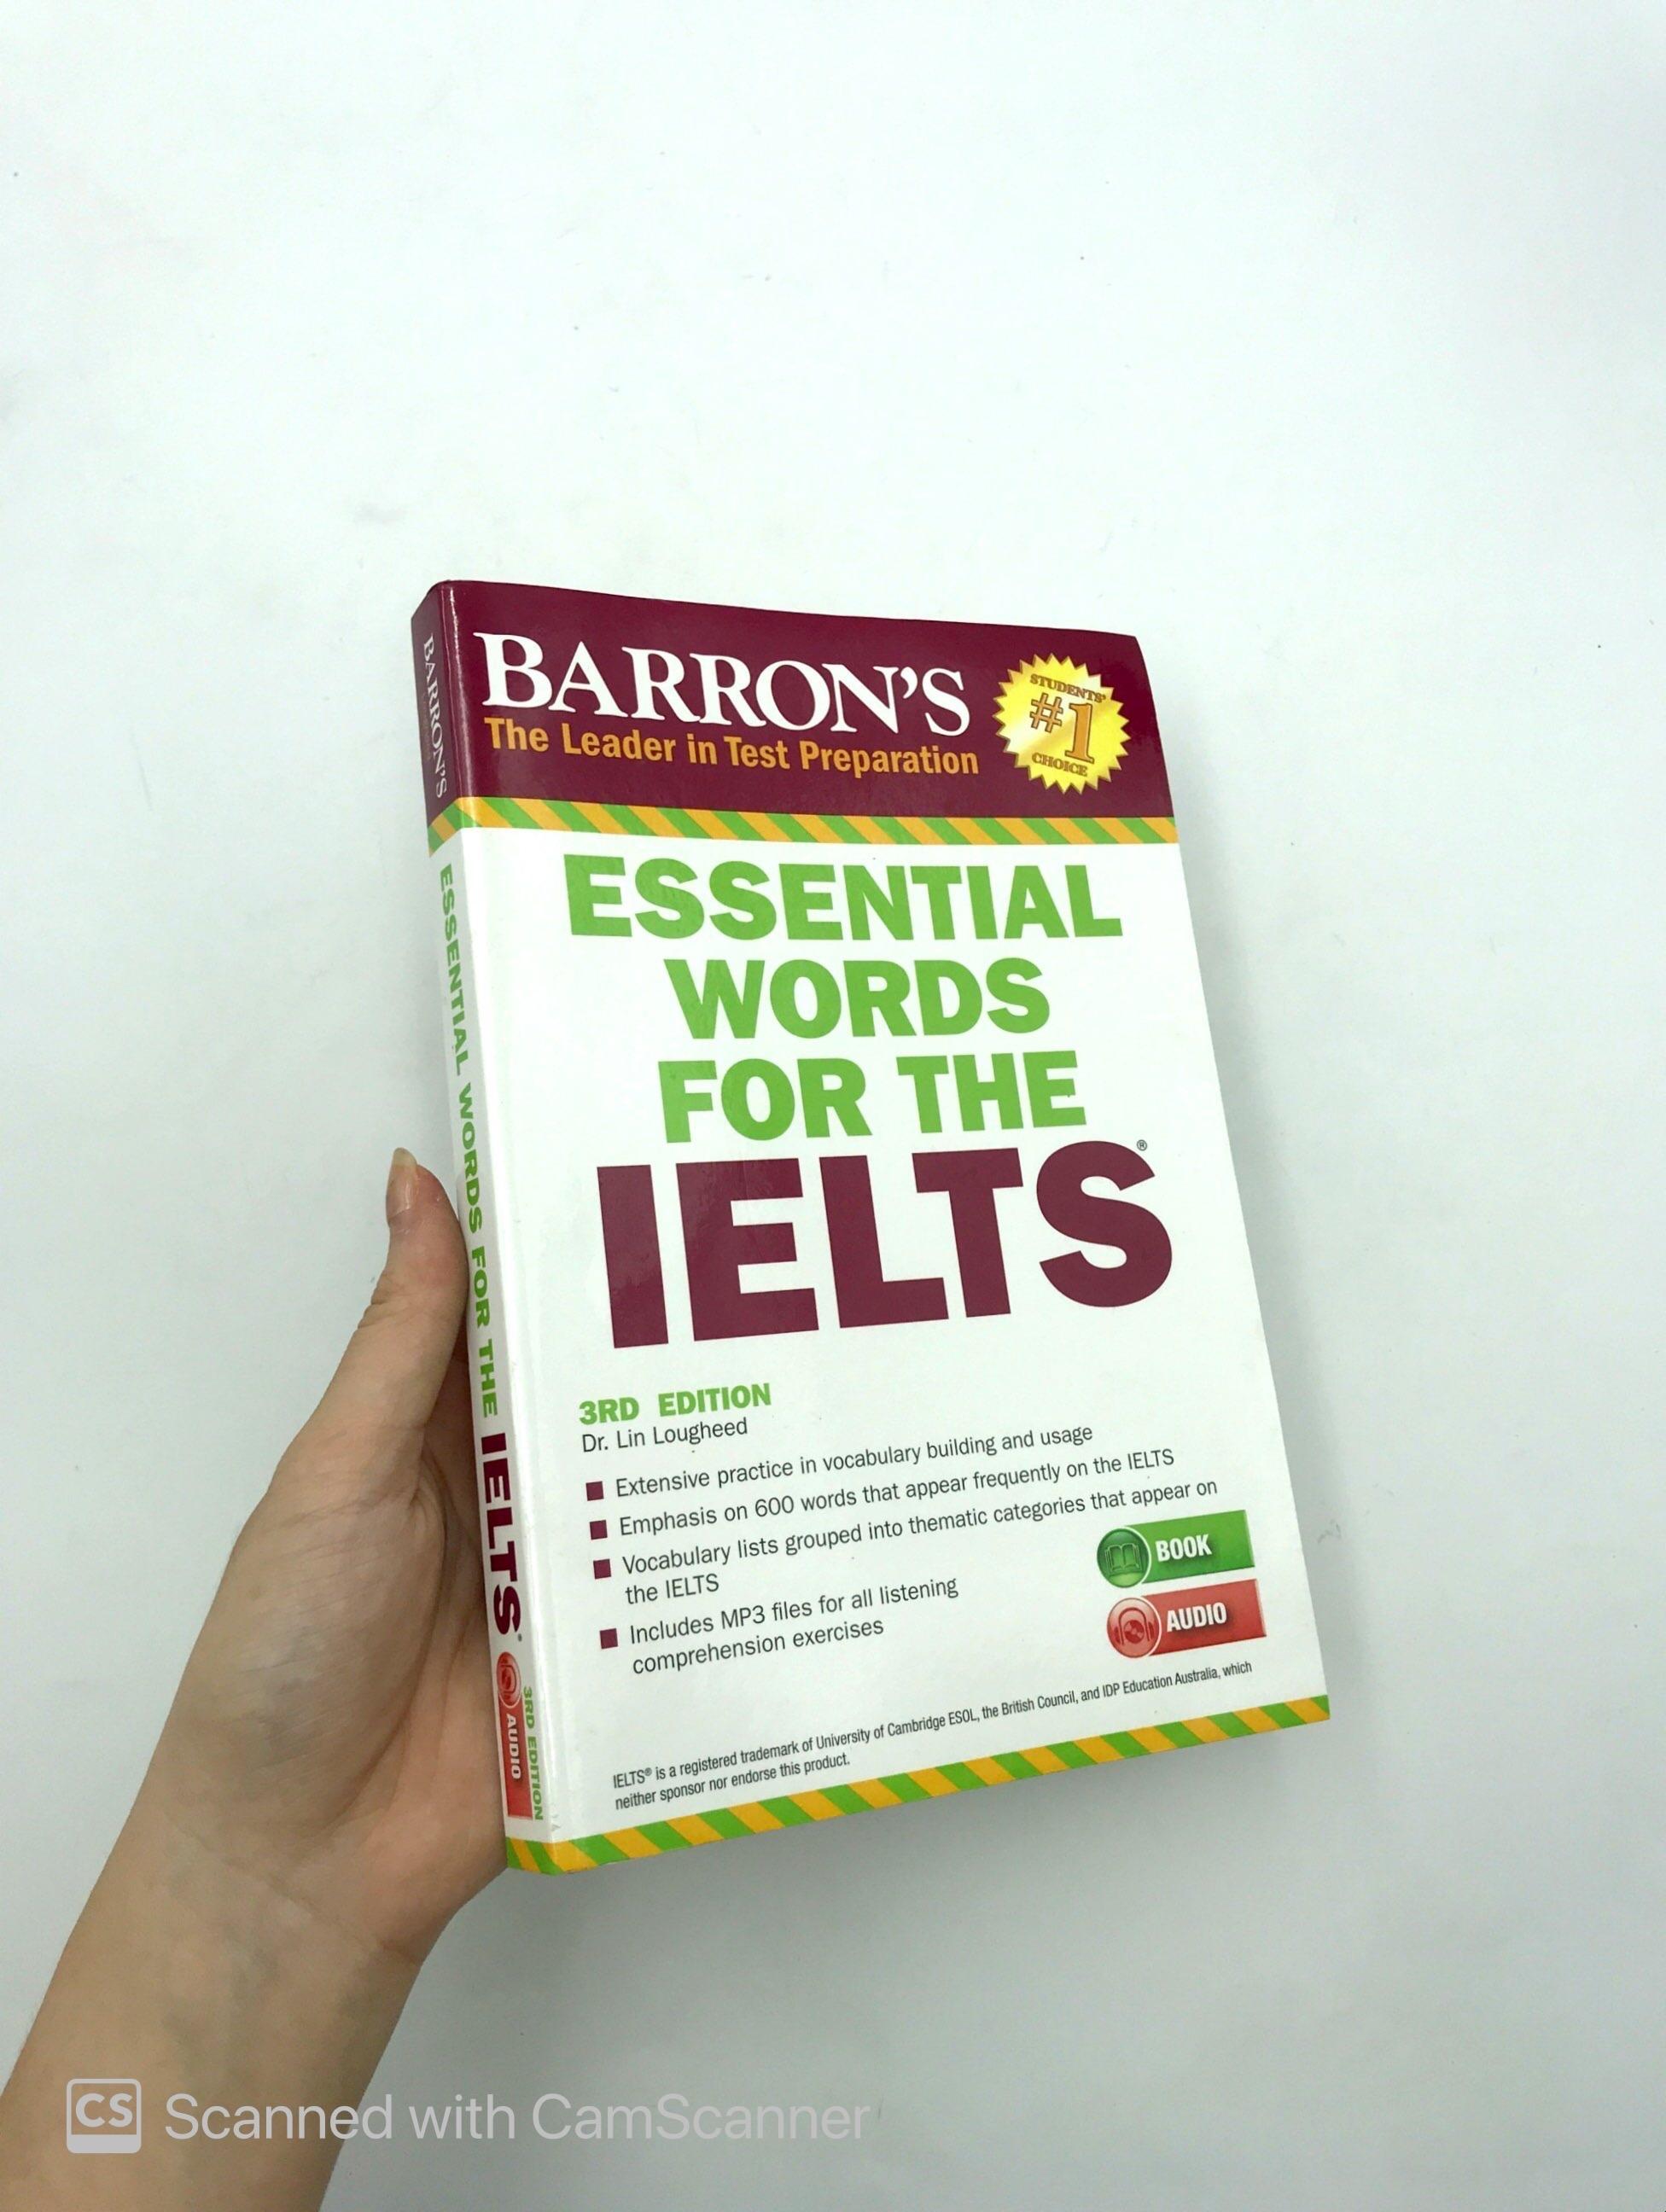 Essential Words for the IELTS